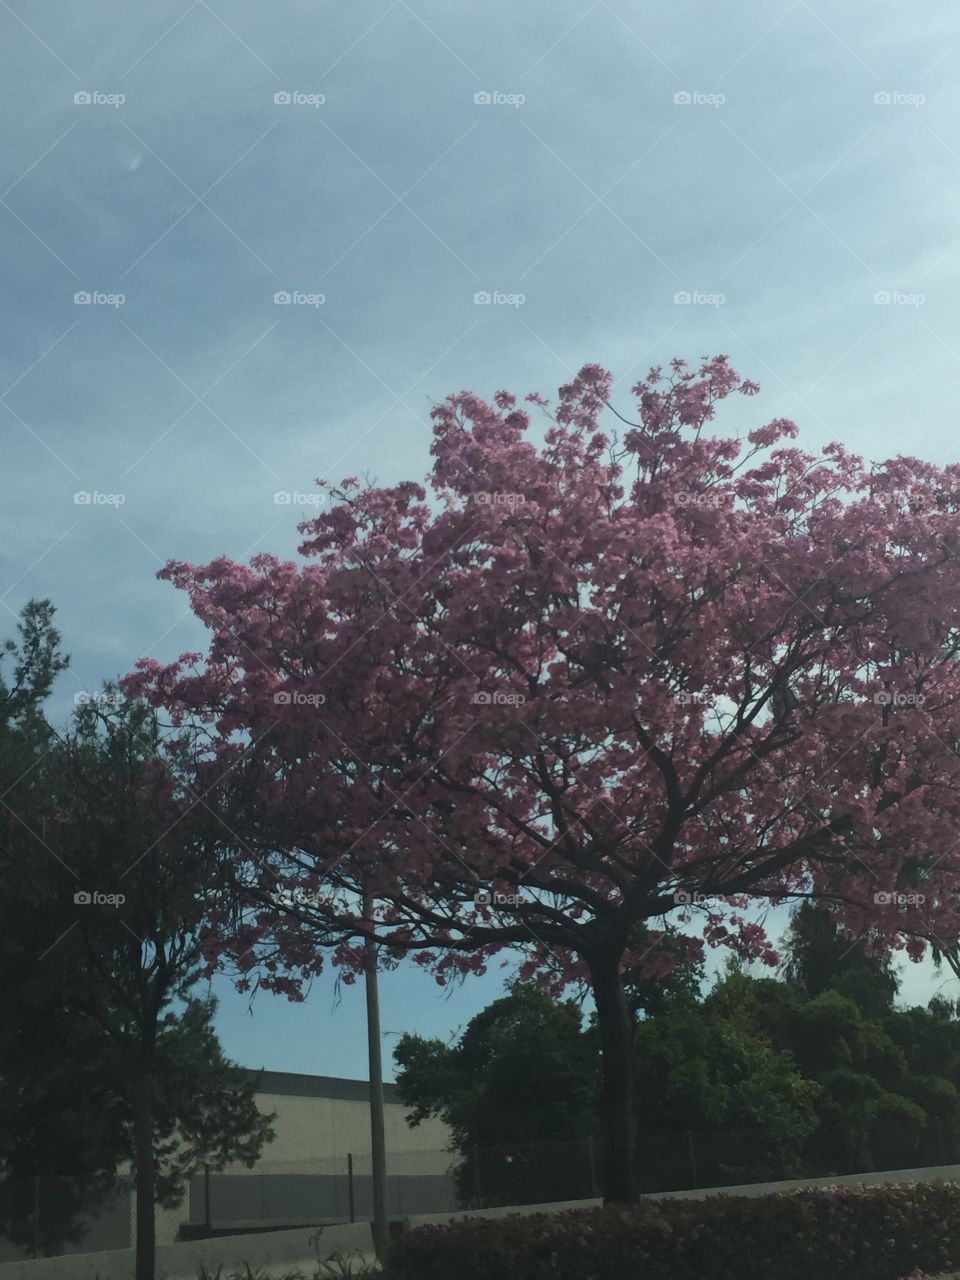 Cherry blossom trees against blue sky. Pink flowers on tree with other green trees behind. 